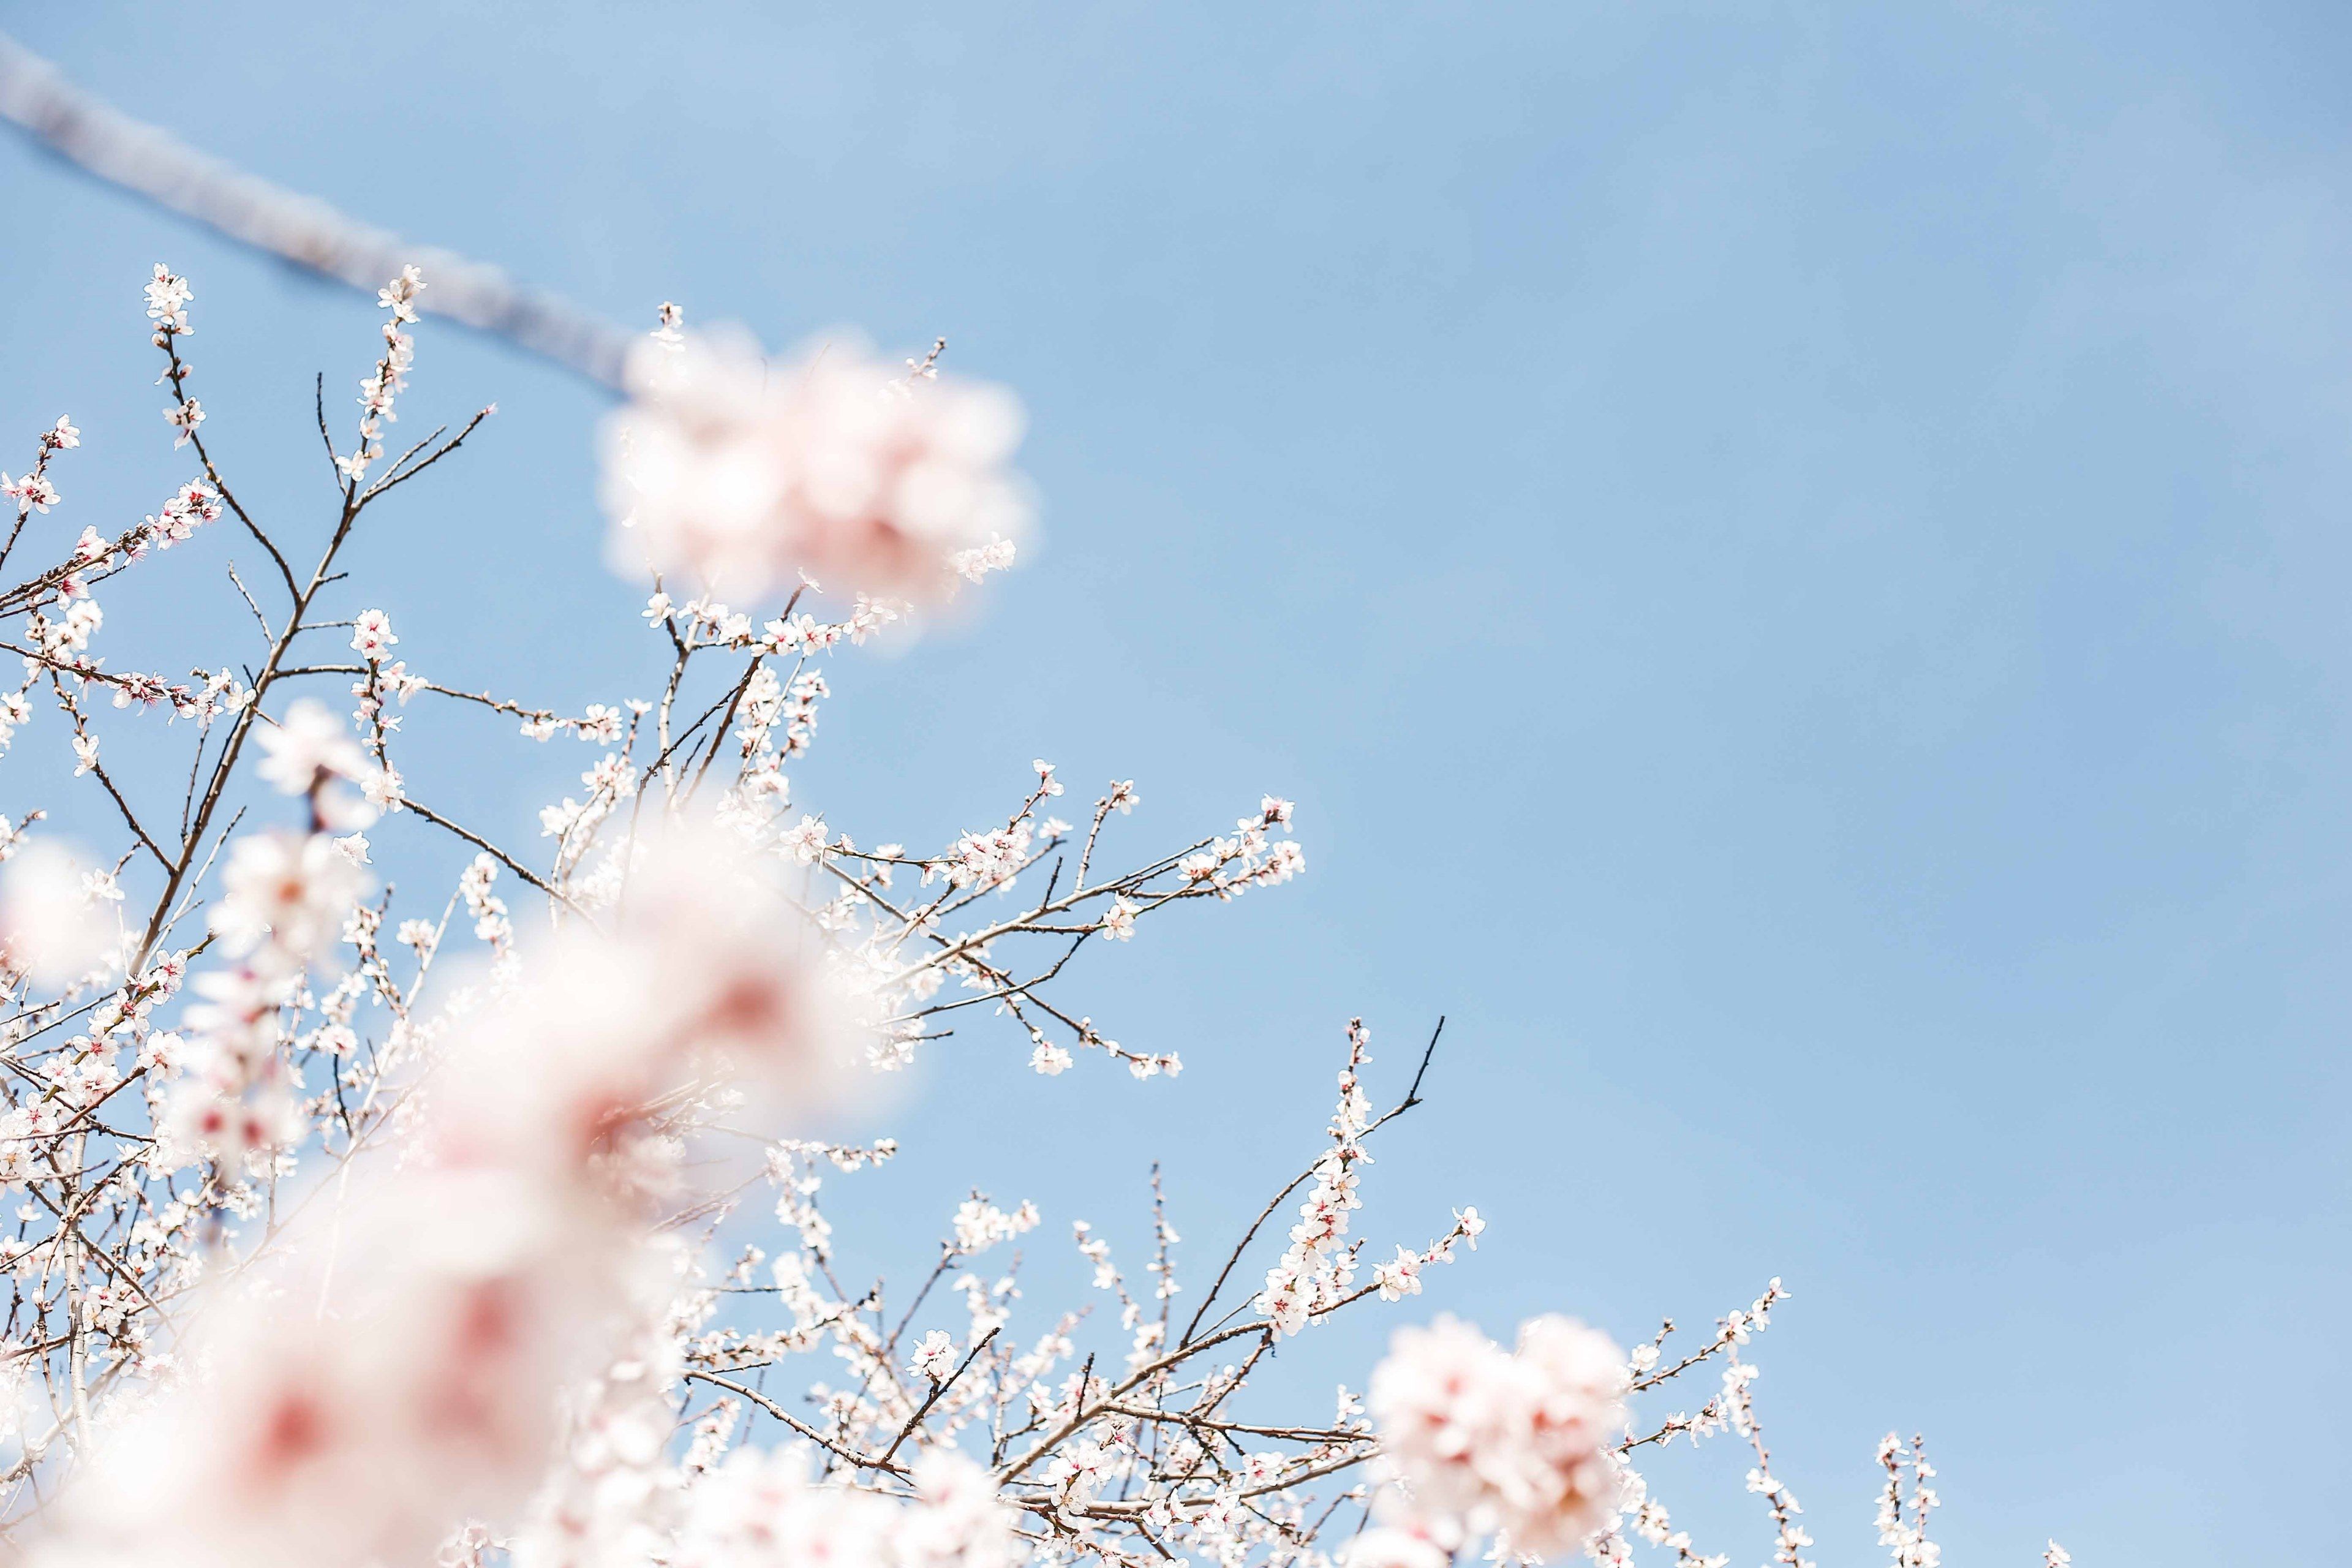 White flowers on a tree branch against a blue sky - Cherry blossom